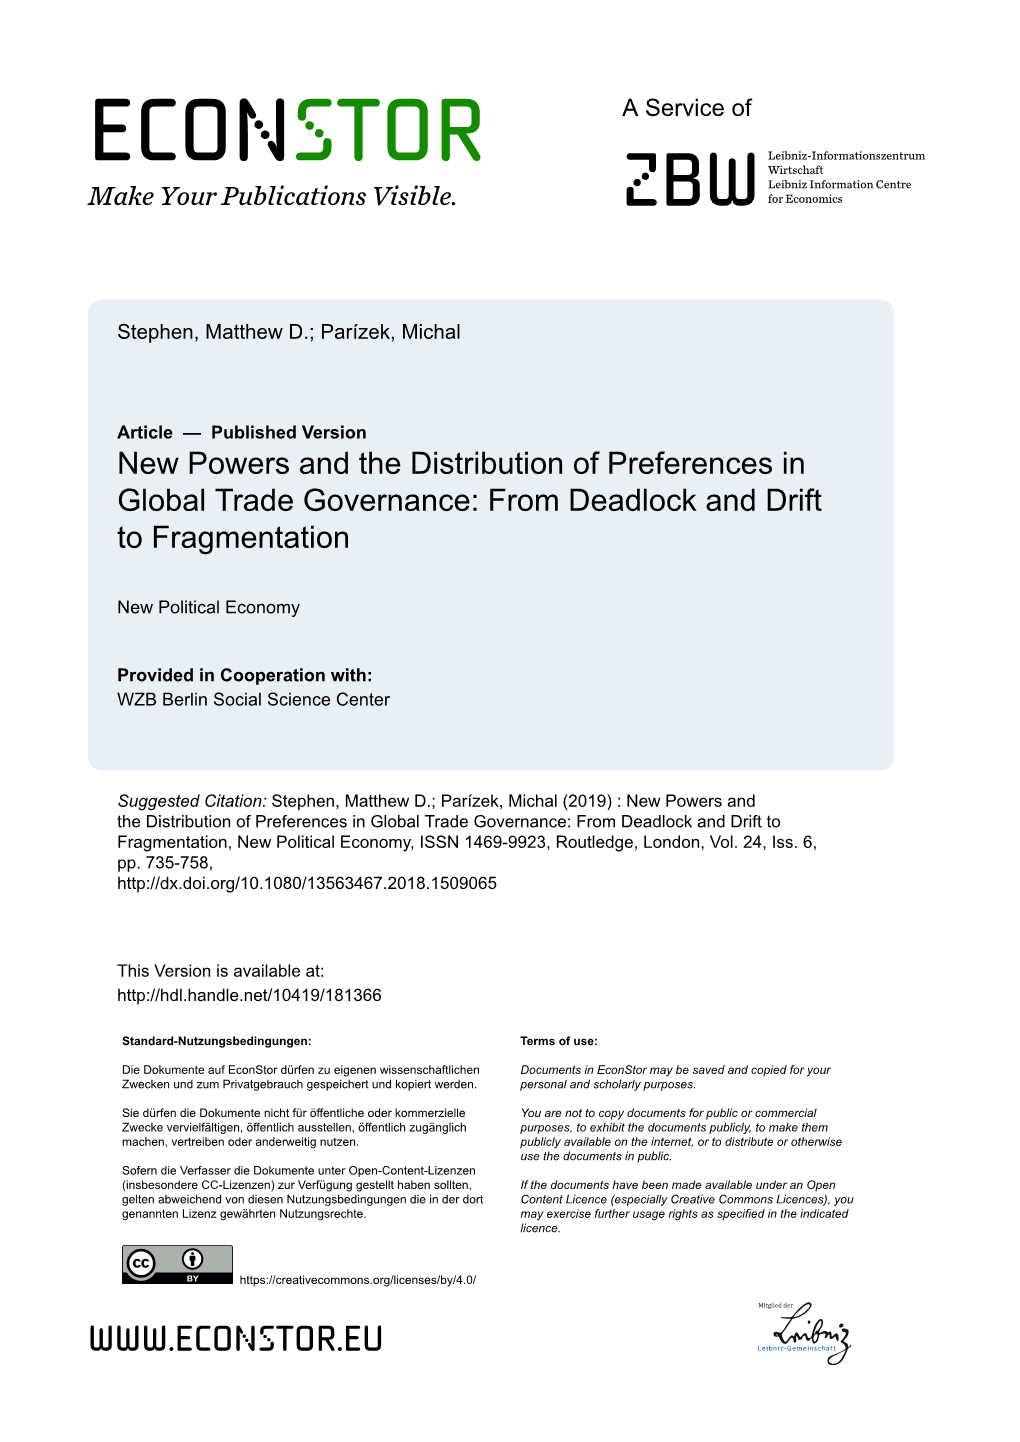 New Powers and the Distribution of Preferences in Global Trade Governance: from Deadlock and Drift to Fragmentation